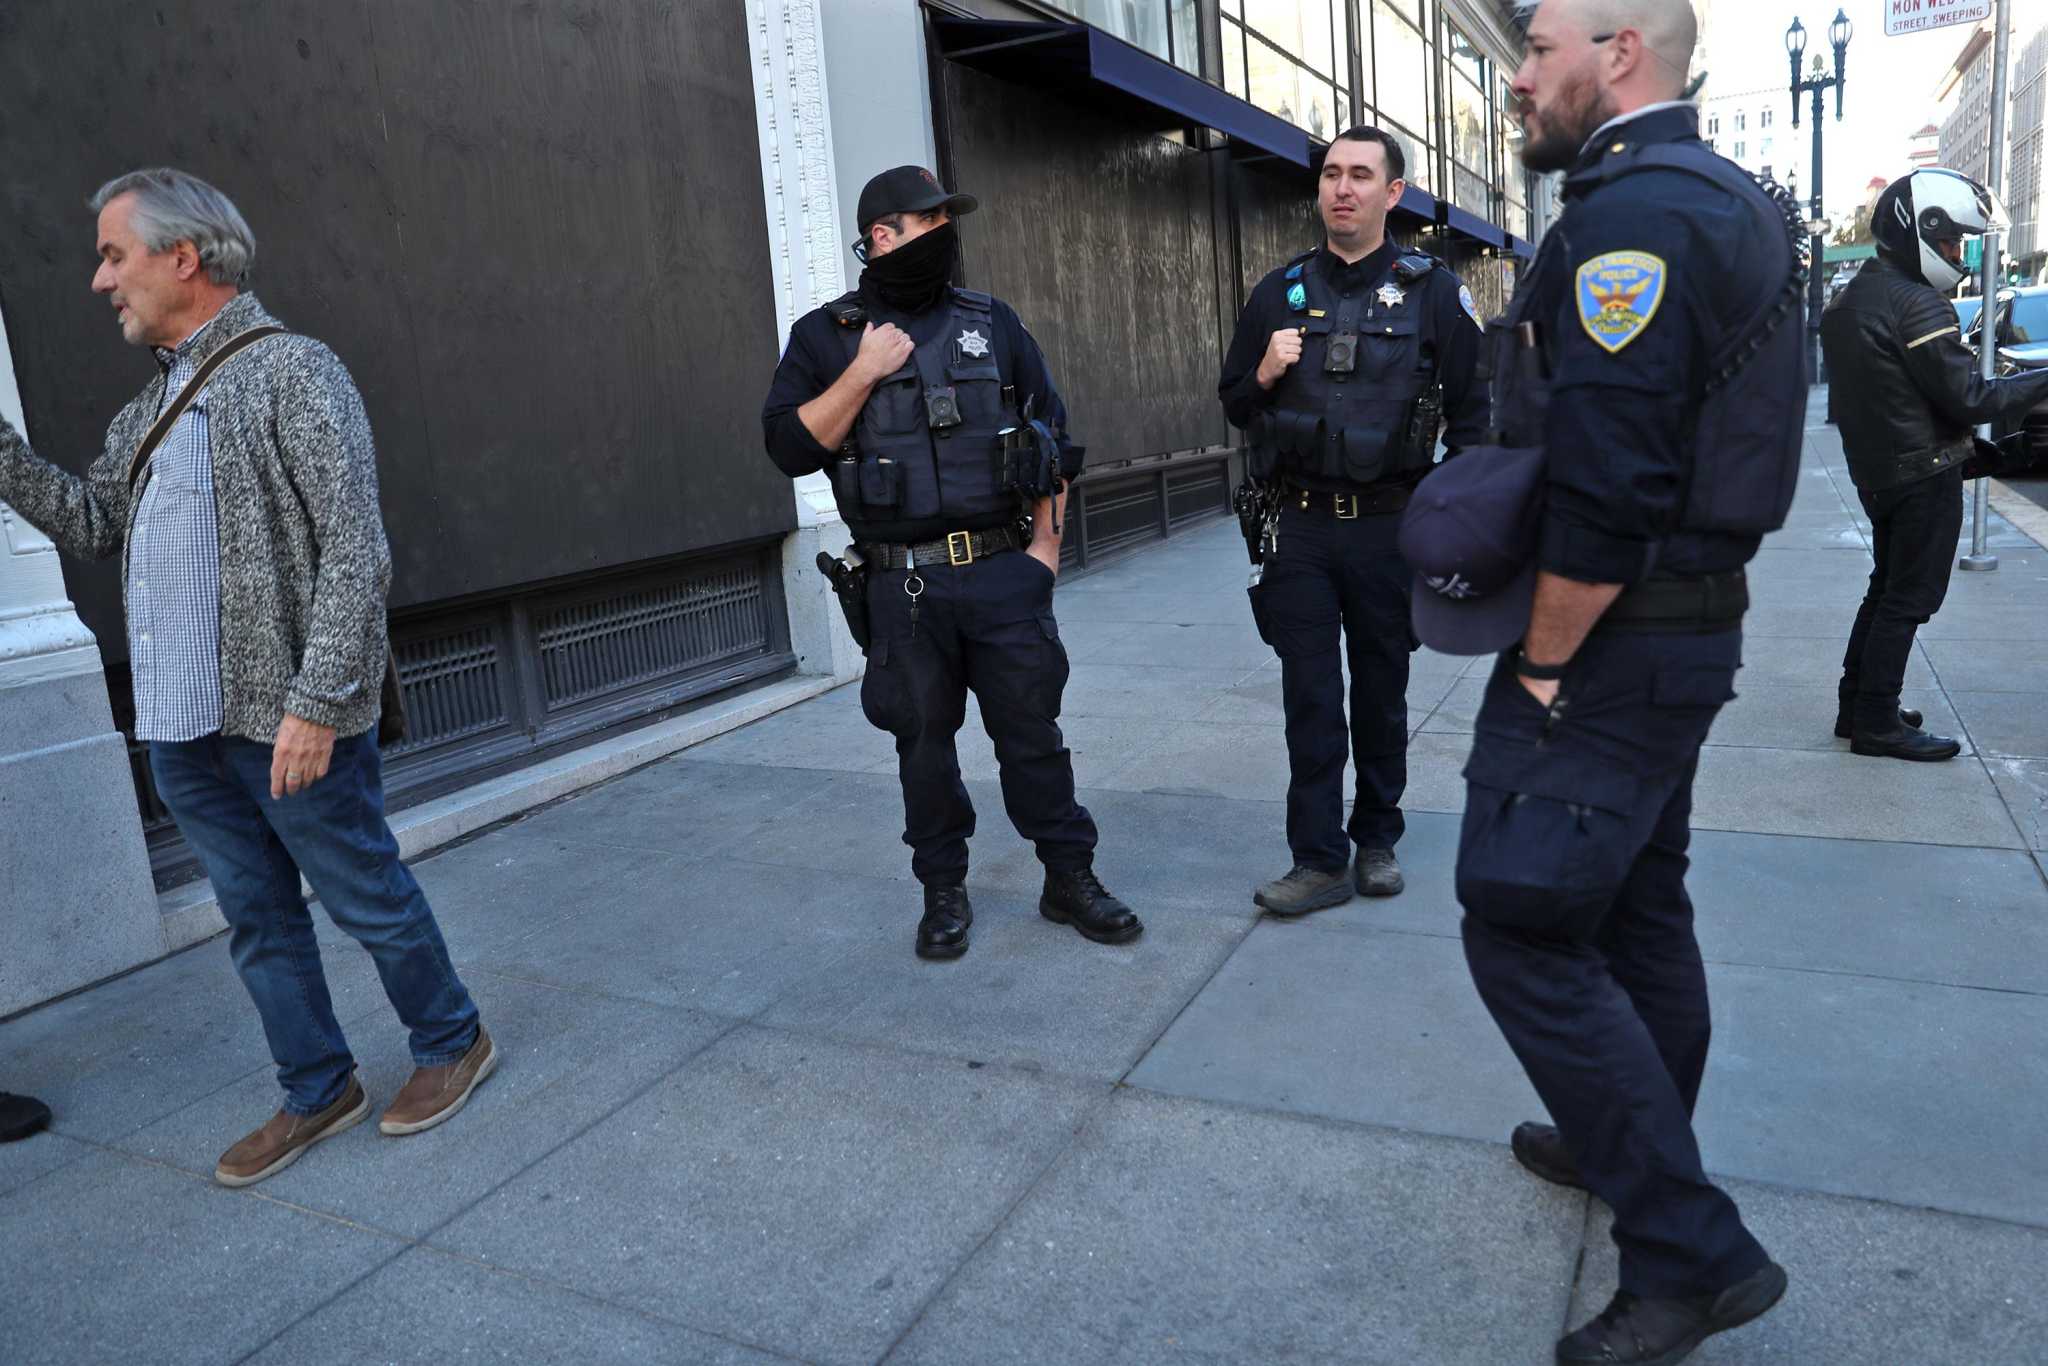 San Francisco Moves To Increase Oversight Of Private Security Guards After Bias Complaints